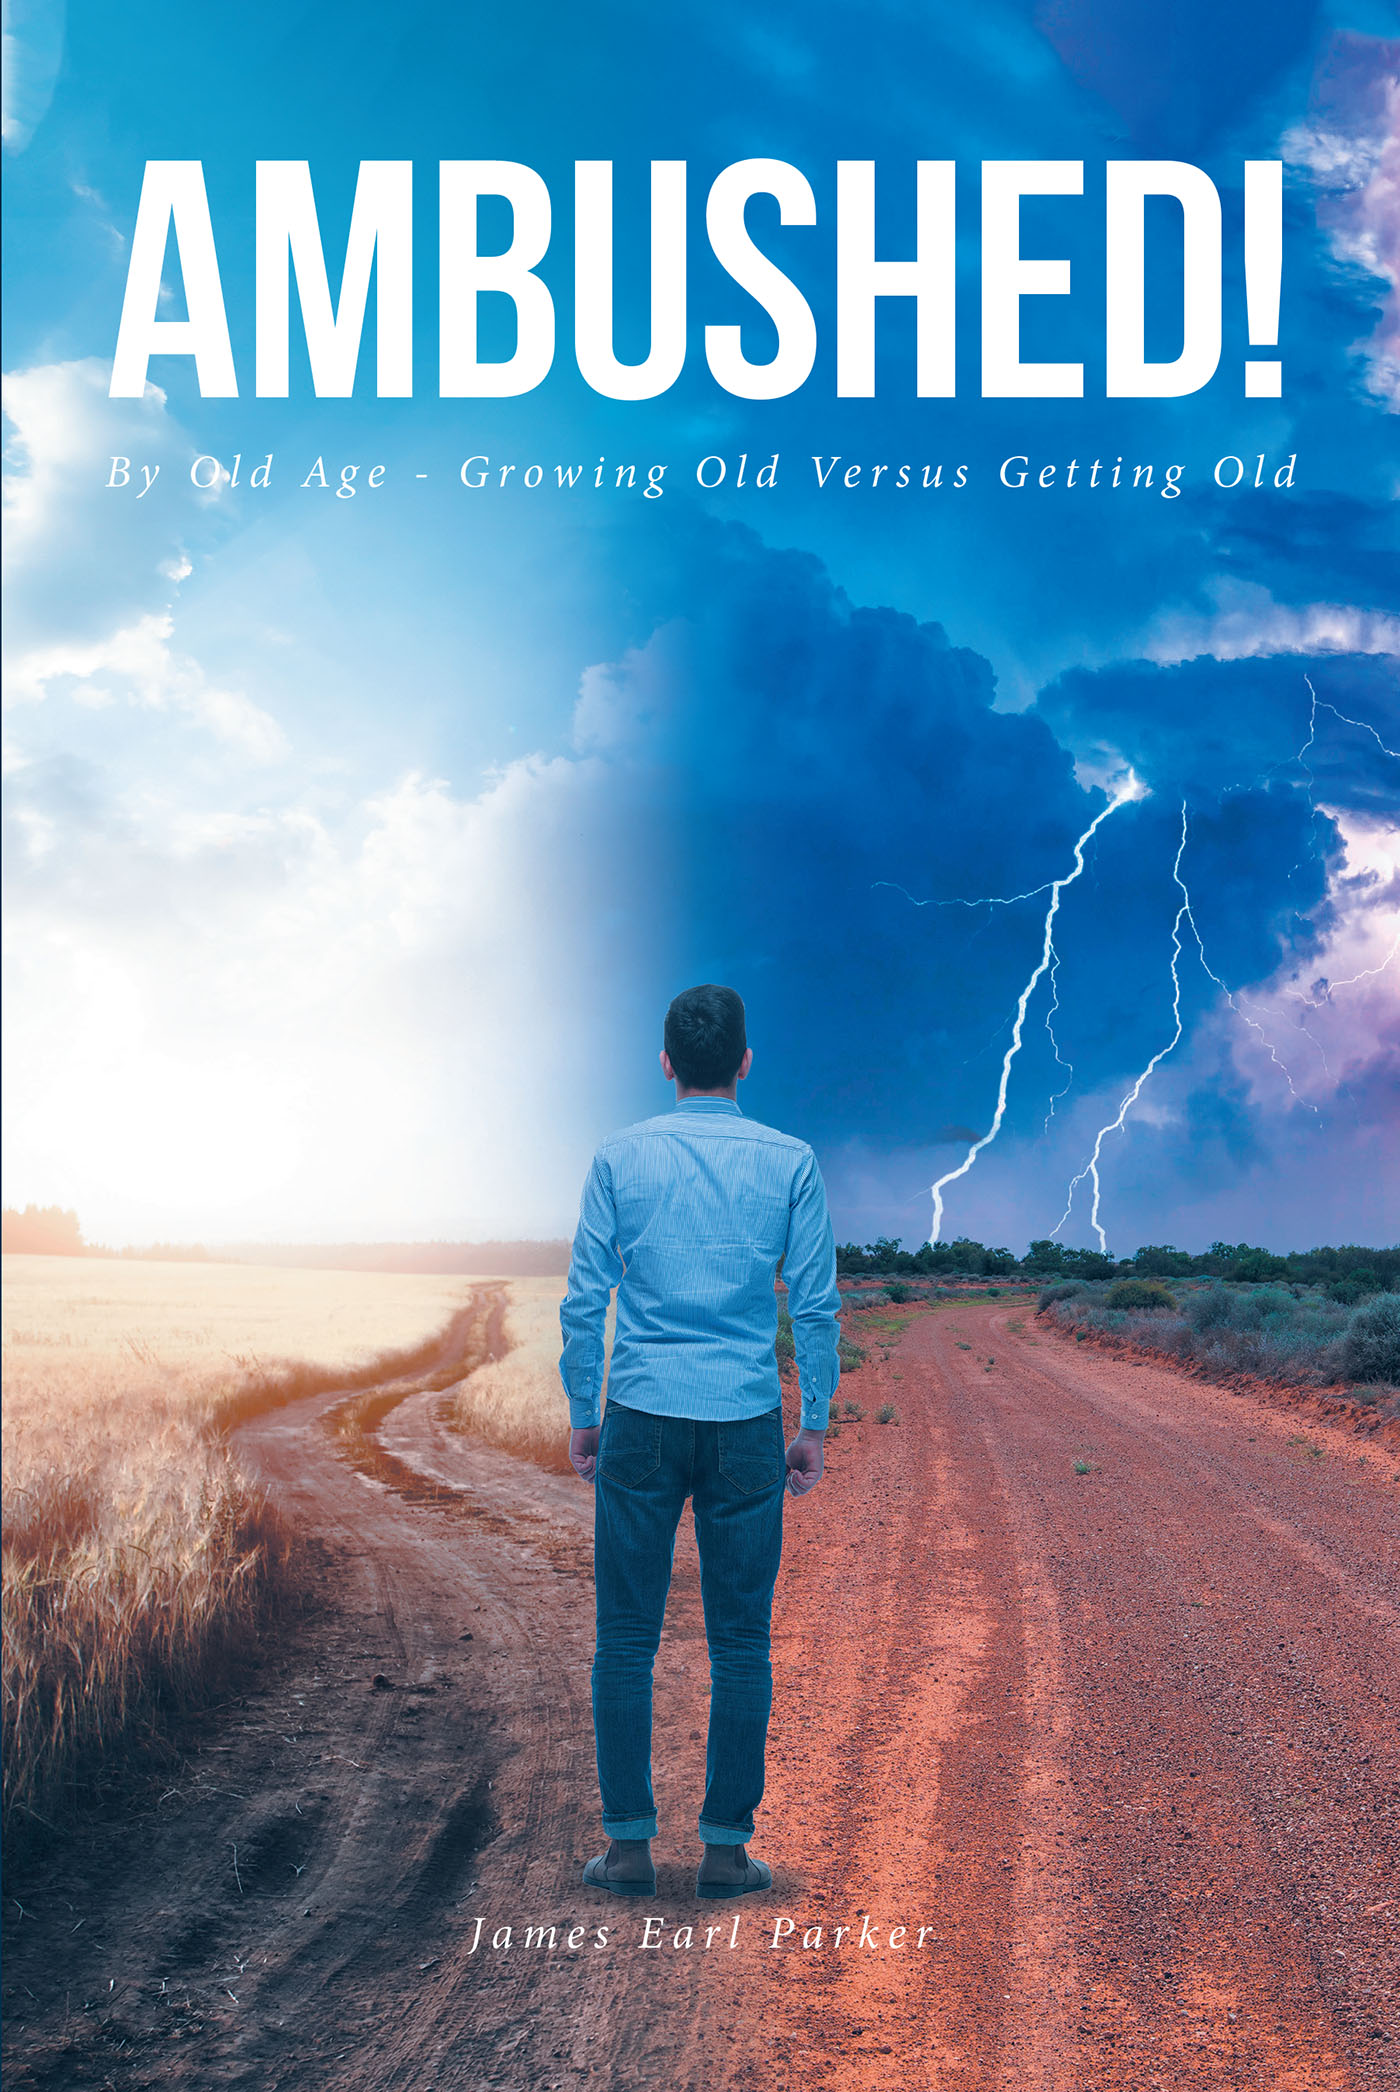 Author James Earl Parker’s New Book "Ambushed!" is an Eye-Opening Discussion on Growing Old While Continuing to Live While Avoiding the Pitfalls That Old Age Often Holds